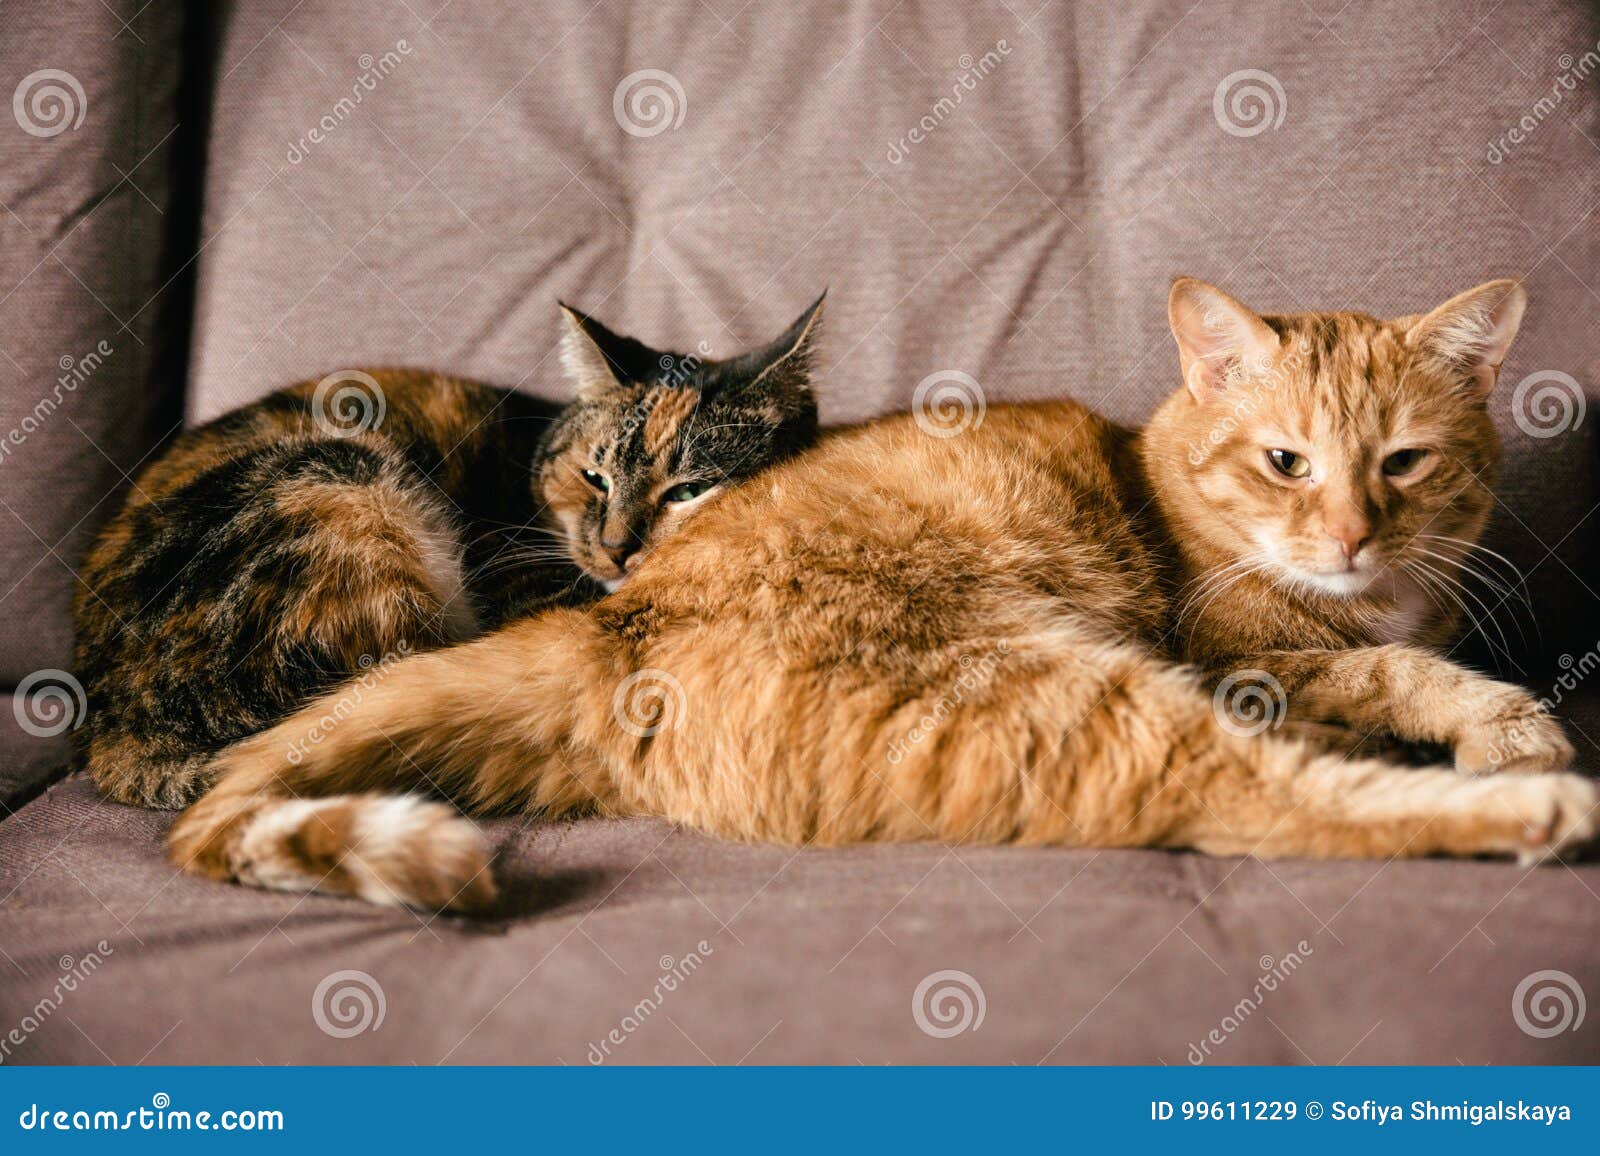 A Pair of Lovers Cats Lying on the Sofa Stock Image - Image of home ...